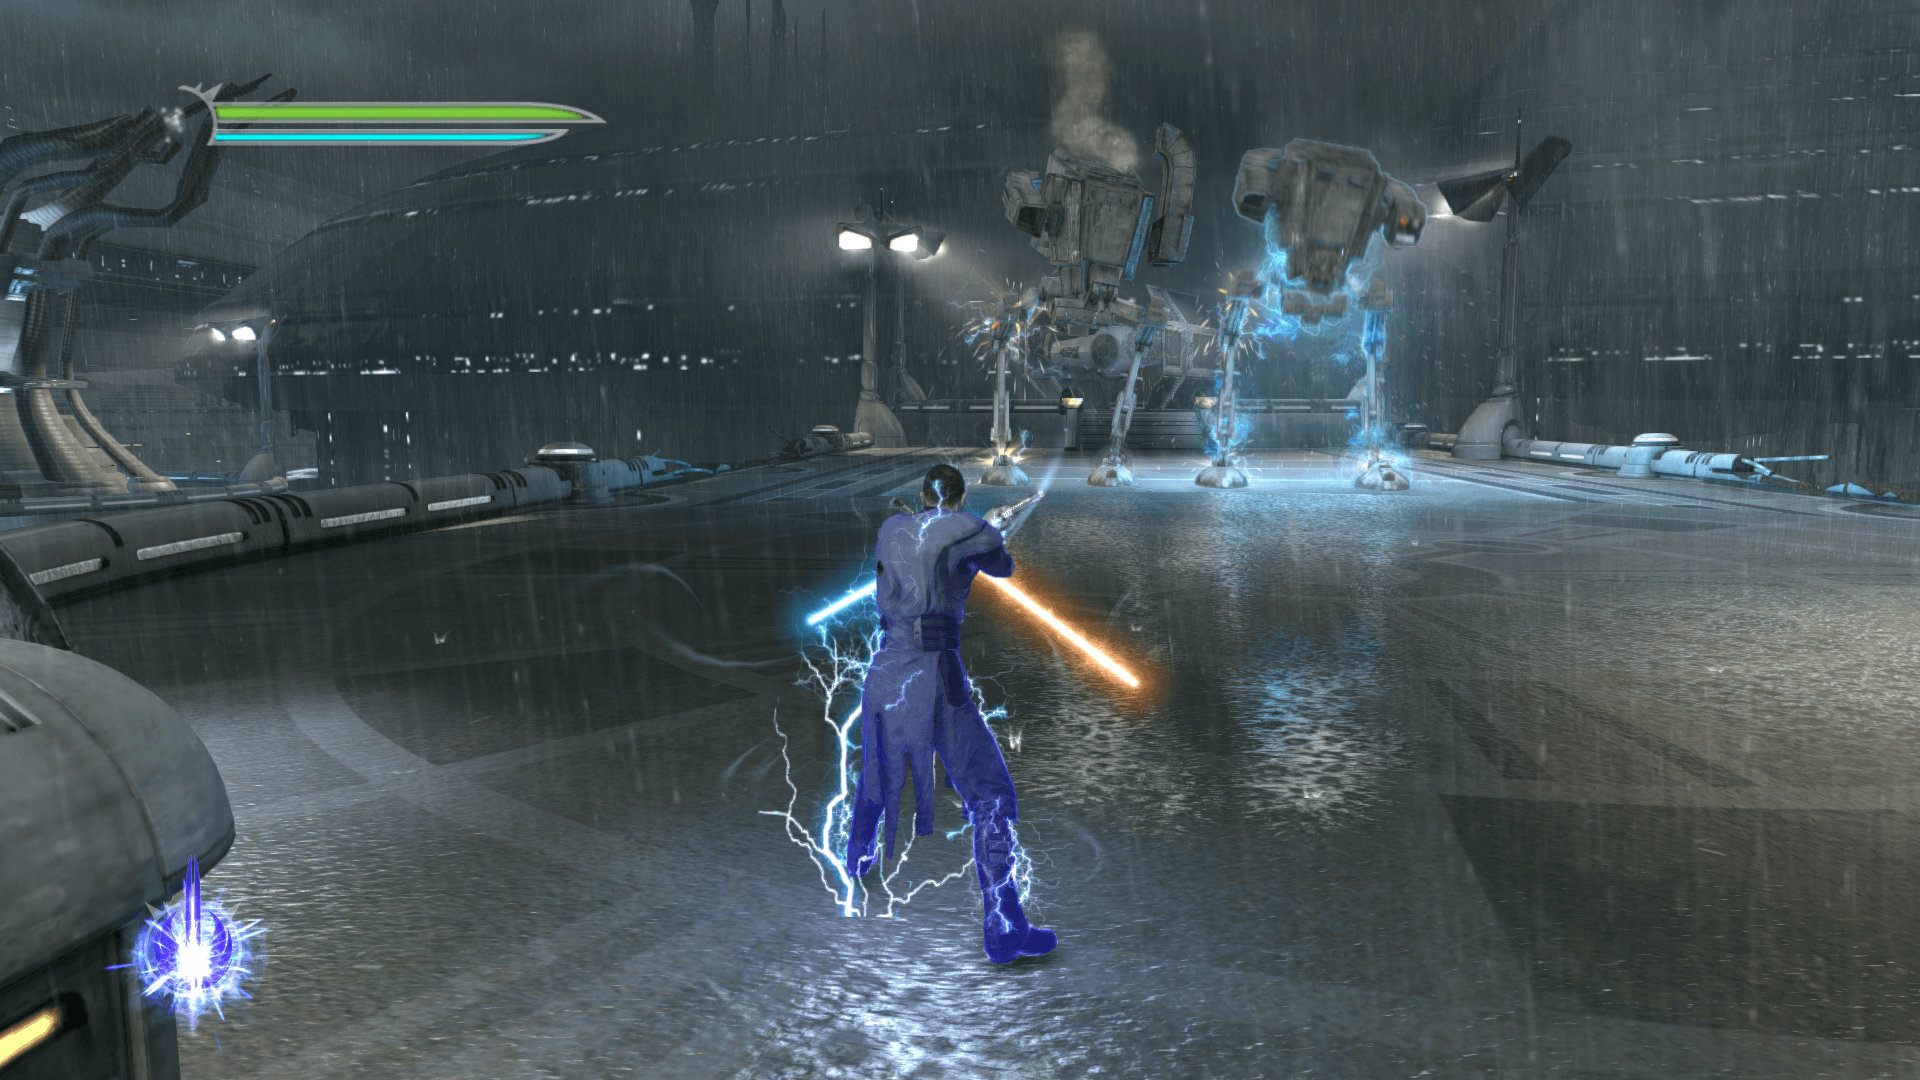 Игра star wars the force unleashed. Star Wars the Force unleashed 2. Star Wars: the Force unleashed. Star Wars the Force unleashed роботы. Star Wars the Force unleashed 2008.